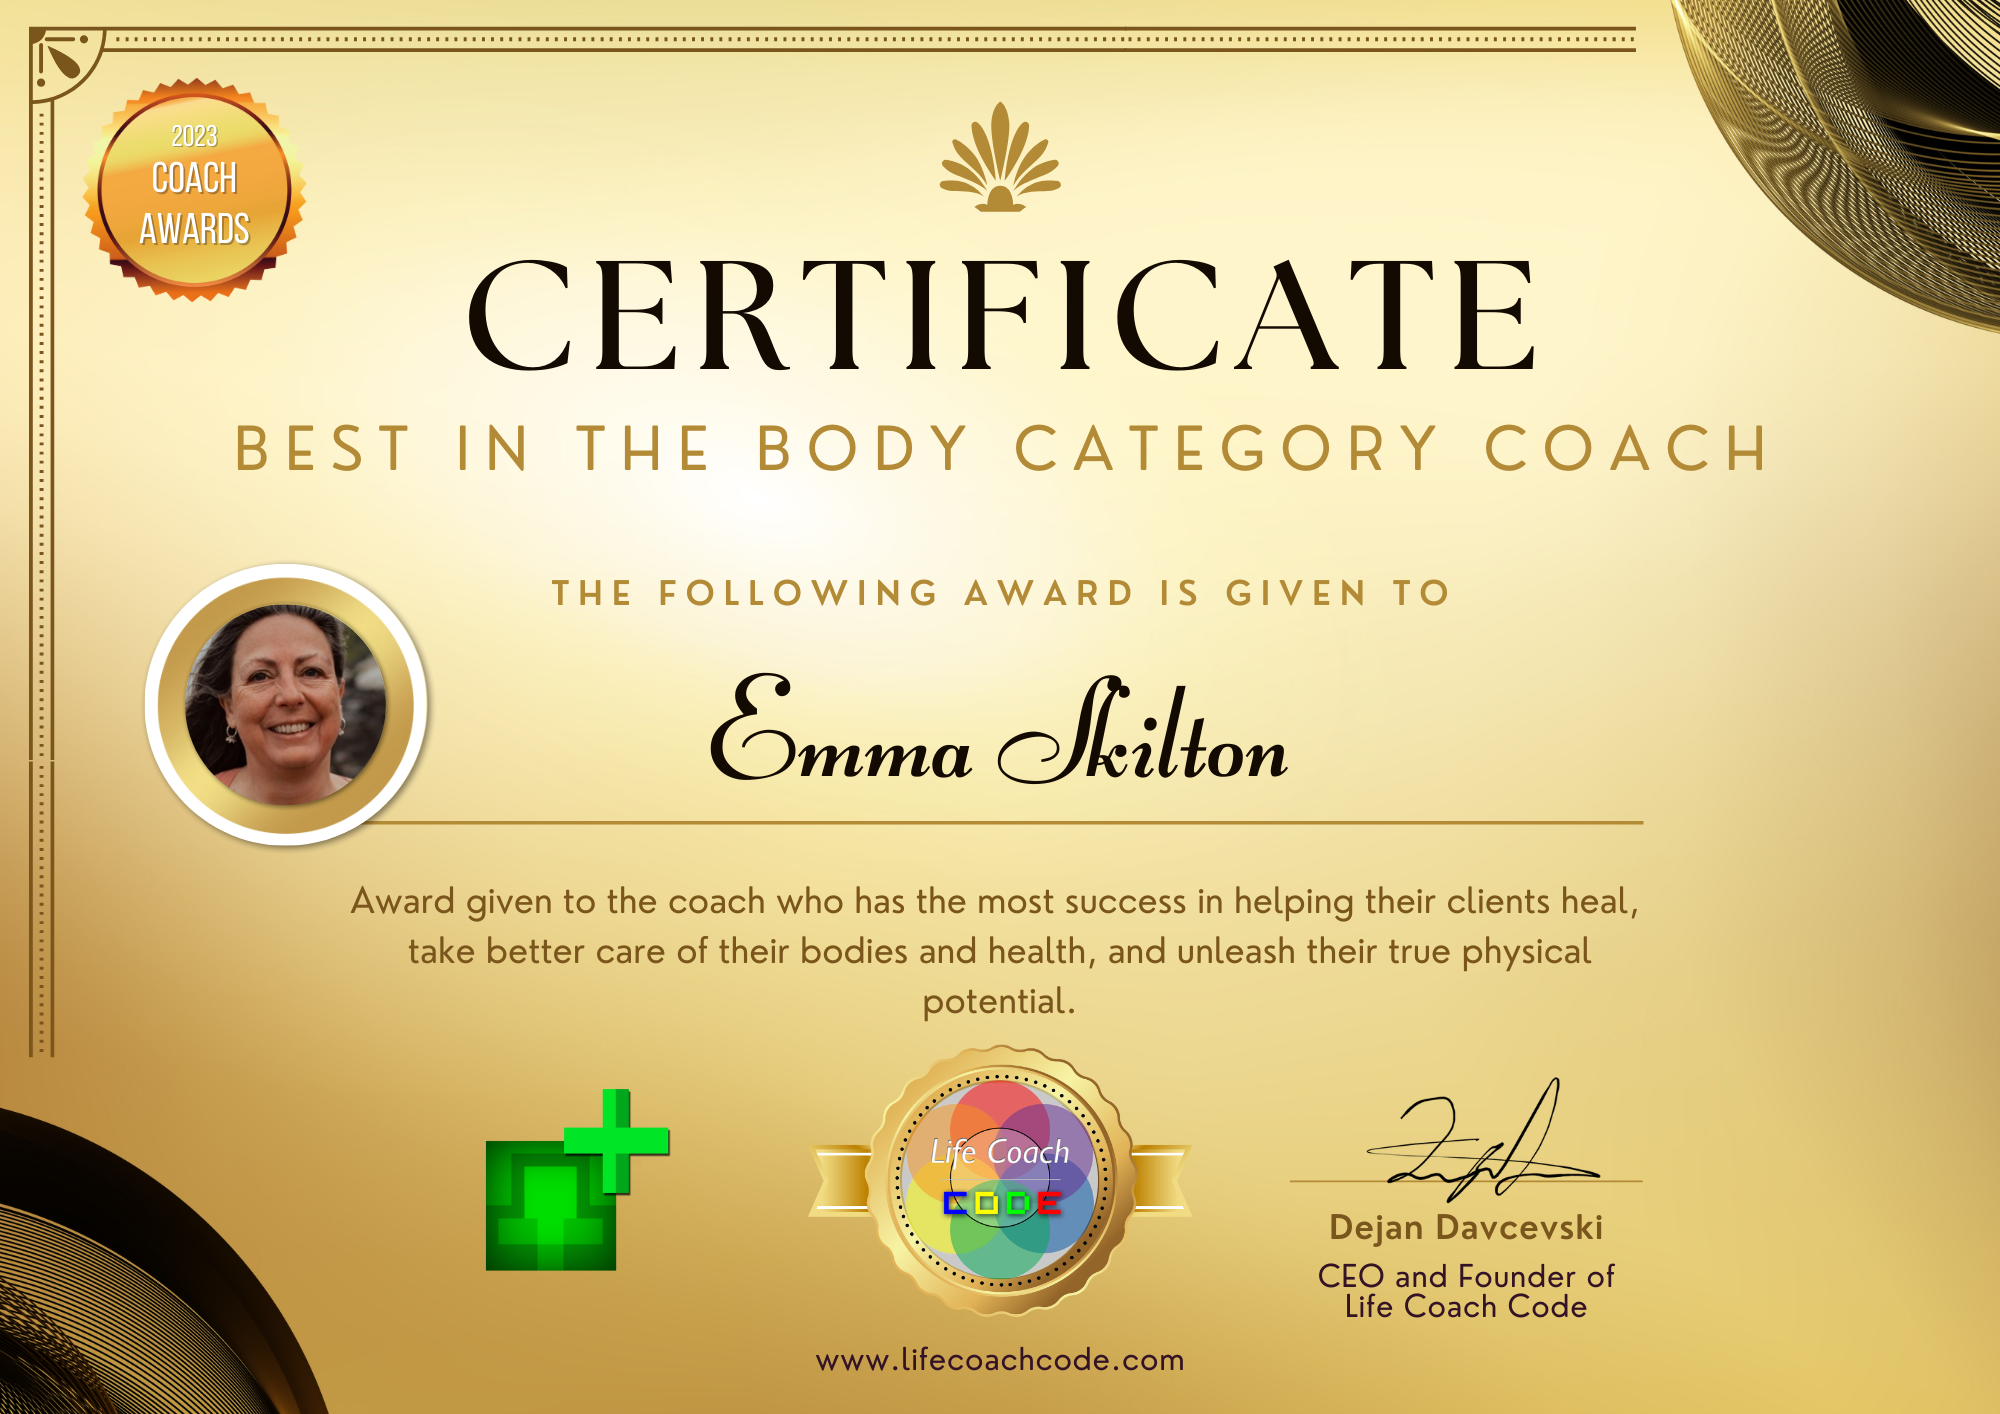 Coach Awards Best in the body category coach